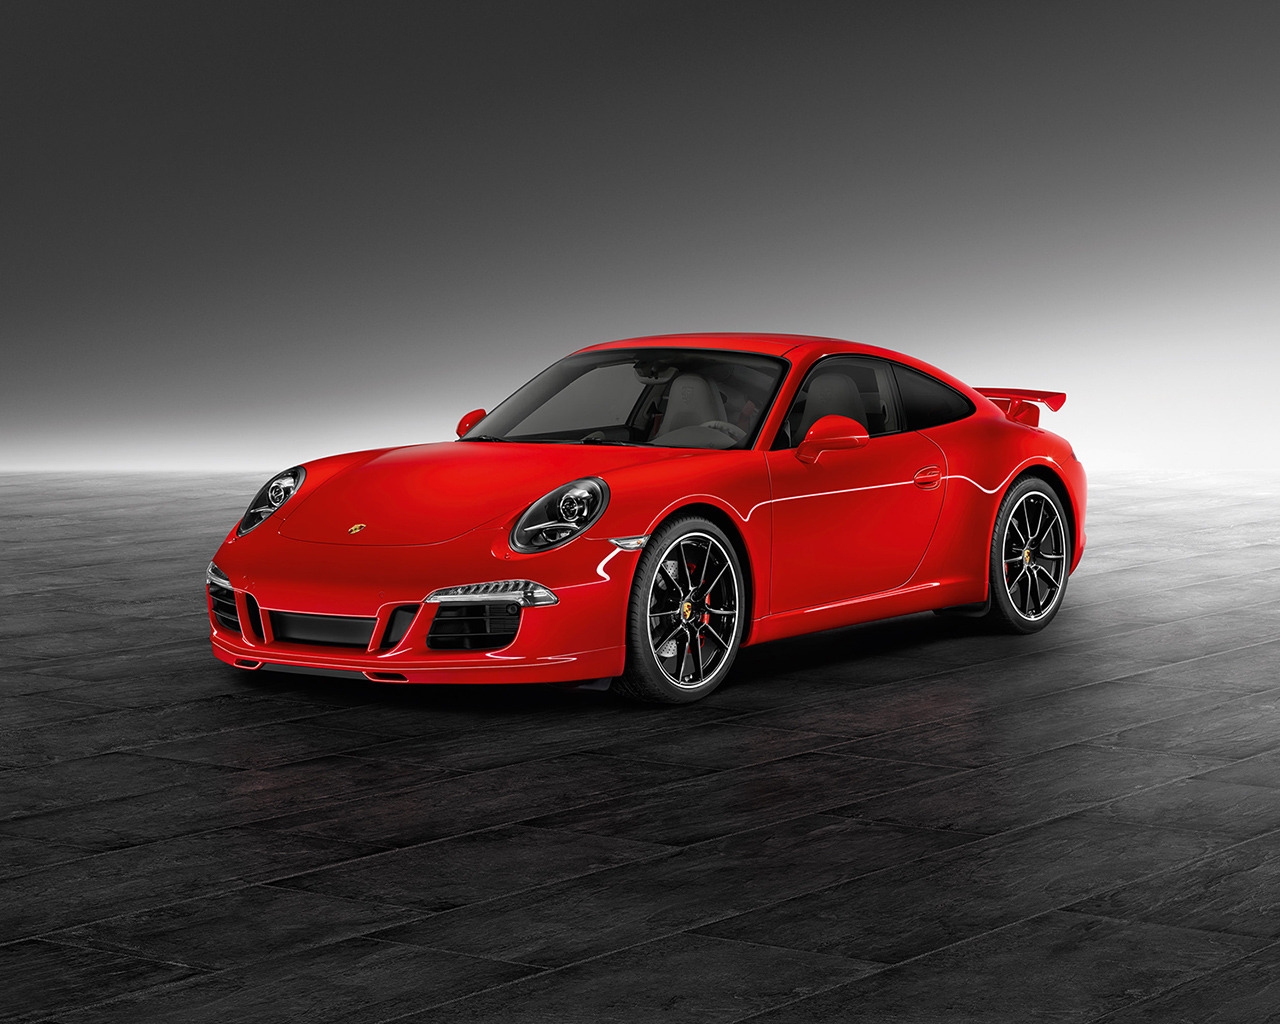 Red 911 Carrera S for 1280 x 1024 resolution